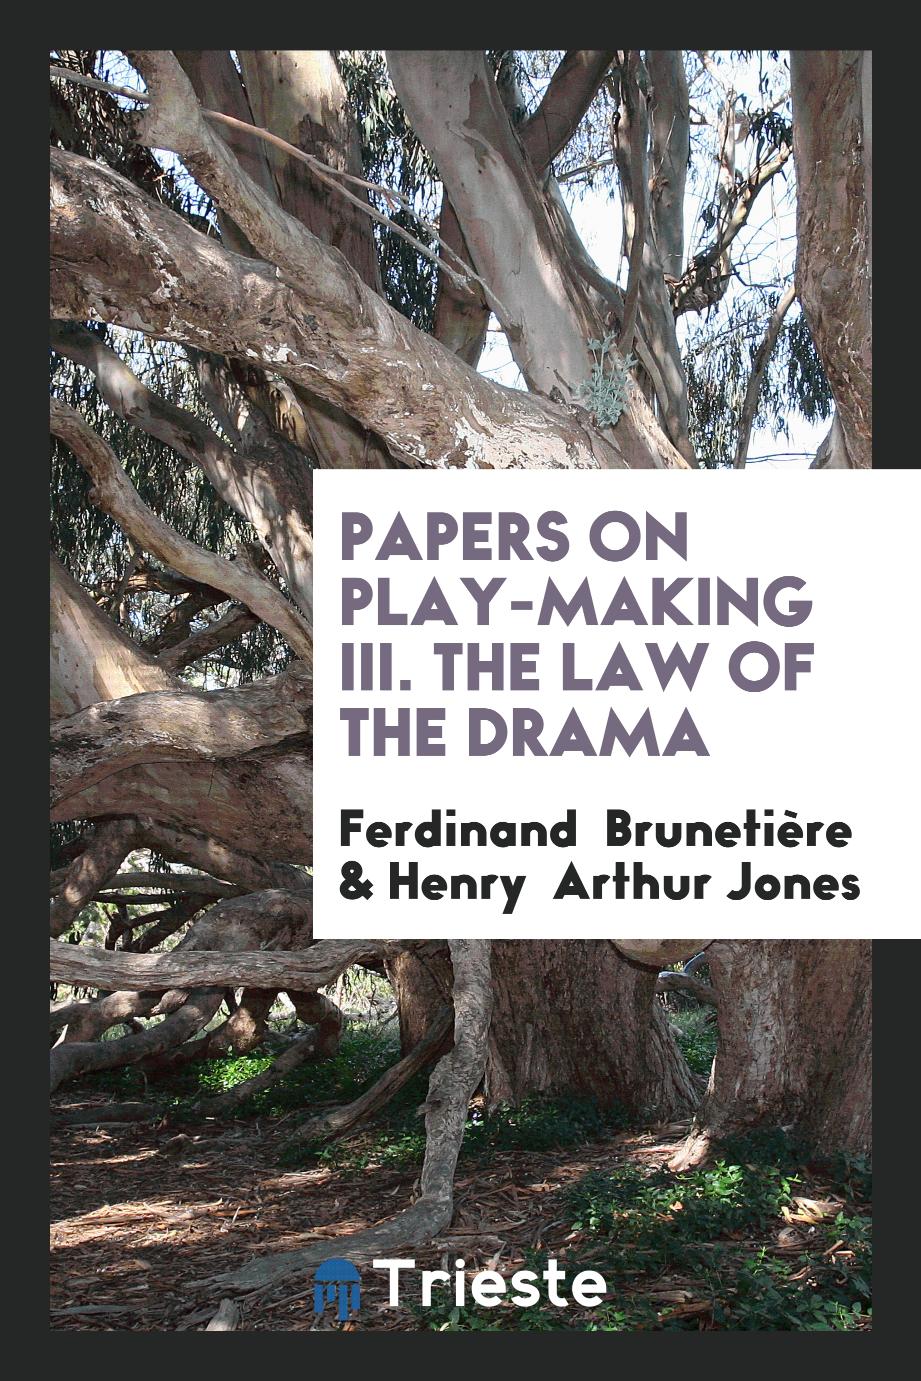 Papers on Play-Making III. The Law of the Drama